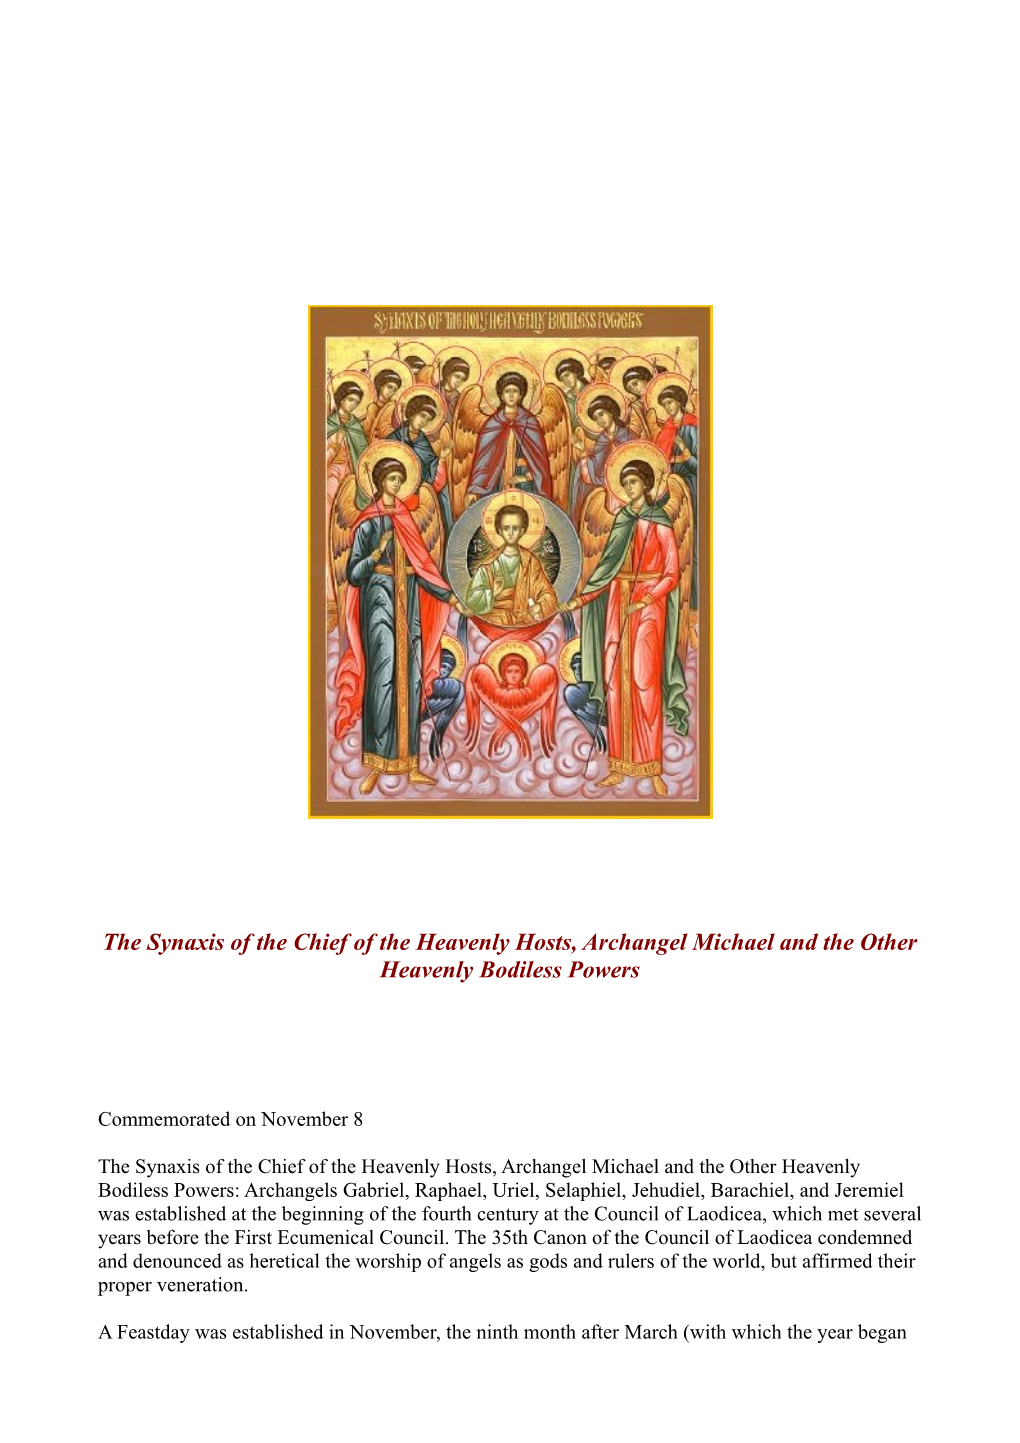 The Synaxis of the Chief of the Heavenly Hosts, Archangel Michael and the Other Heavenly Bodiless Powers